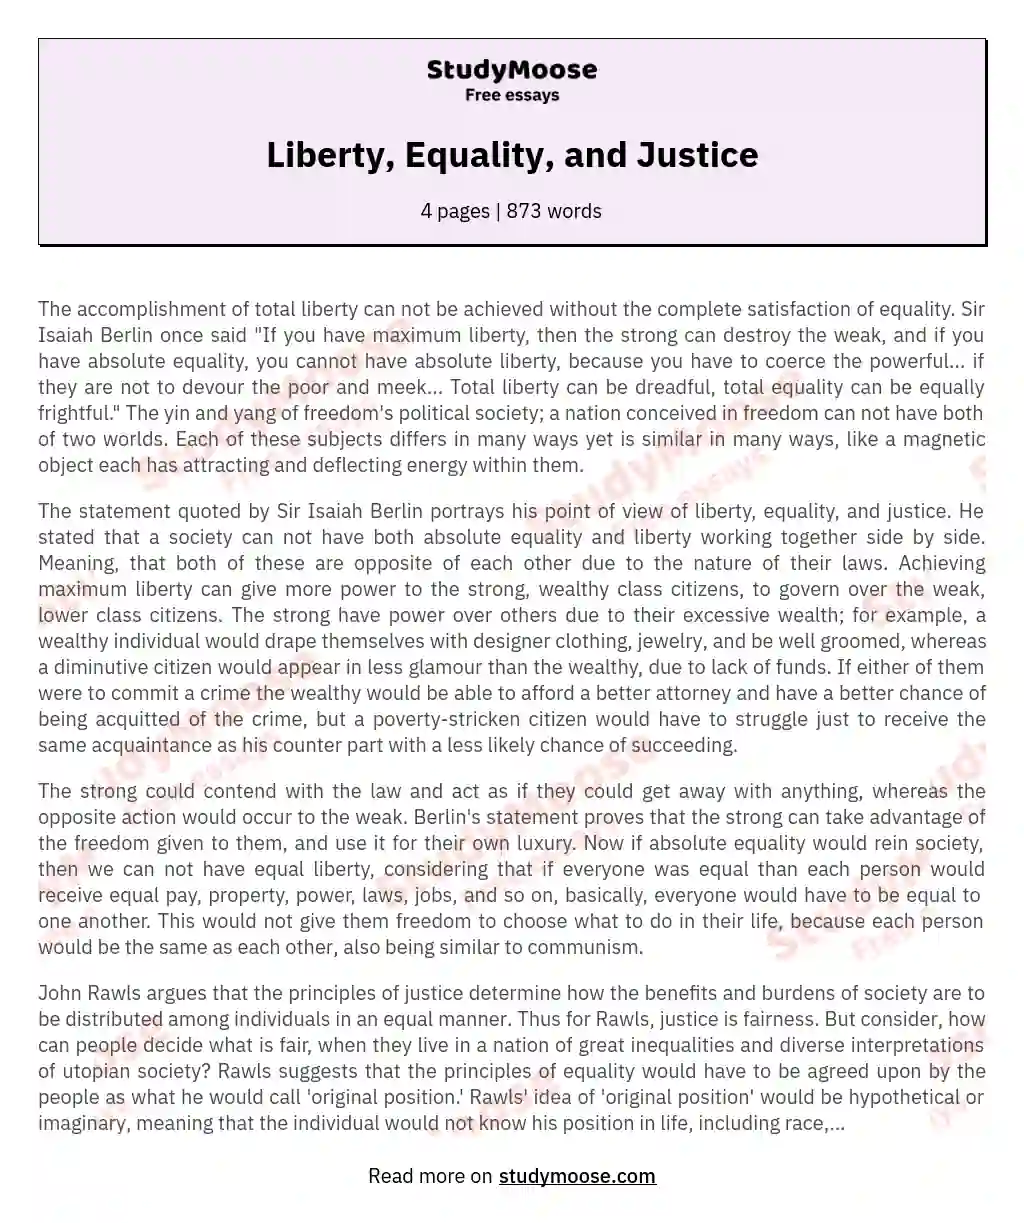 Liberty, Equality, and Justice essay